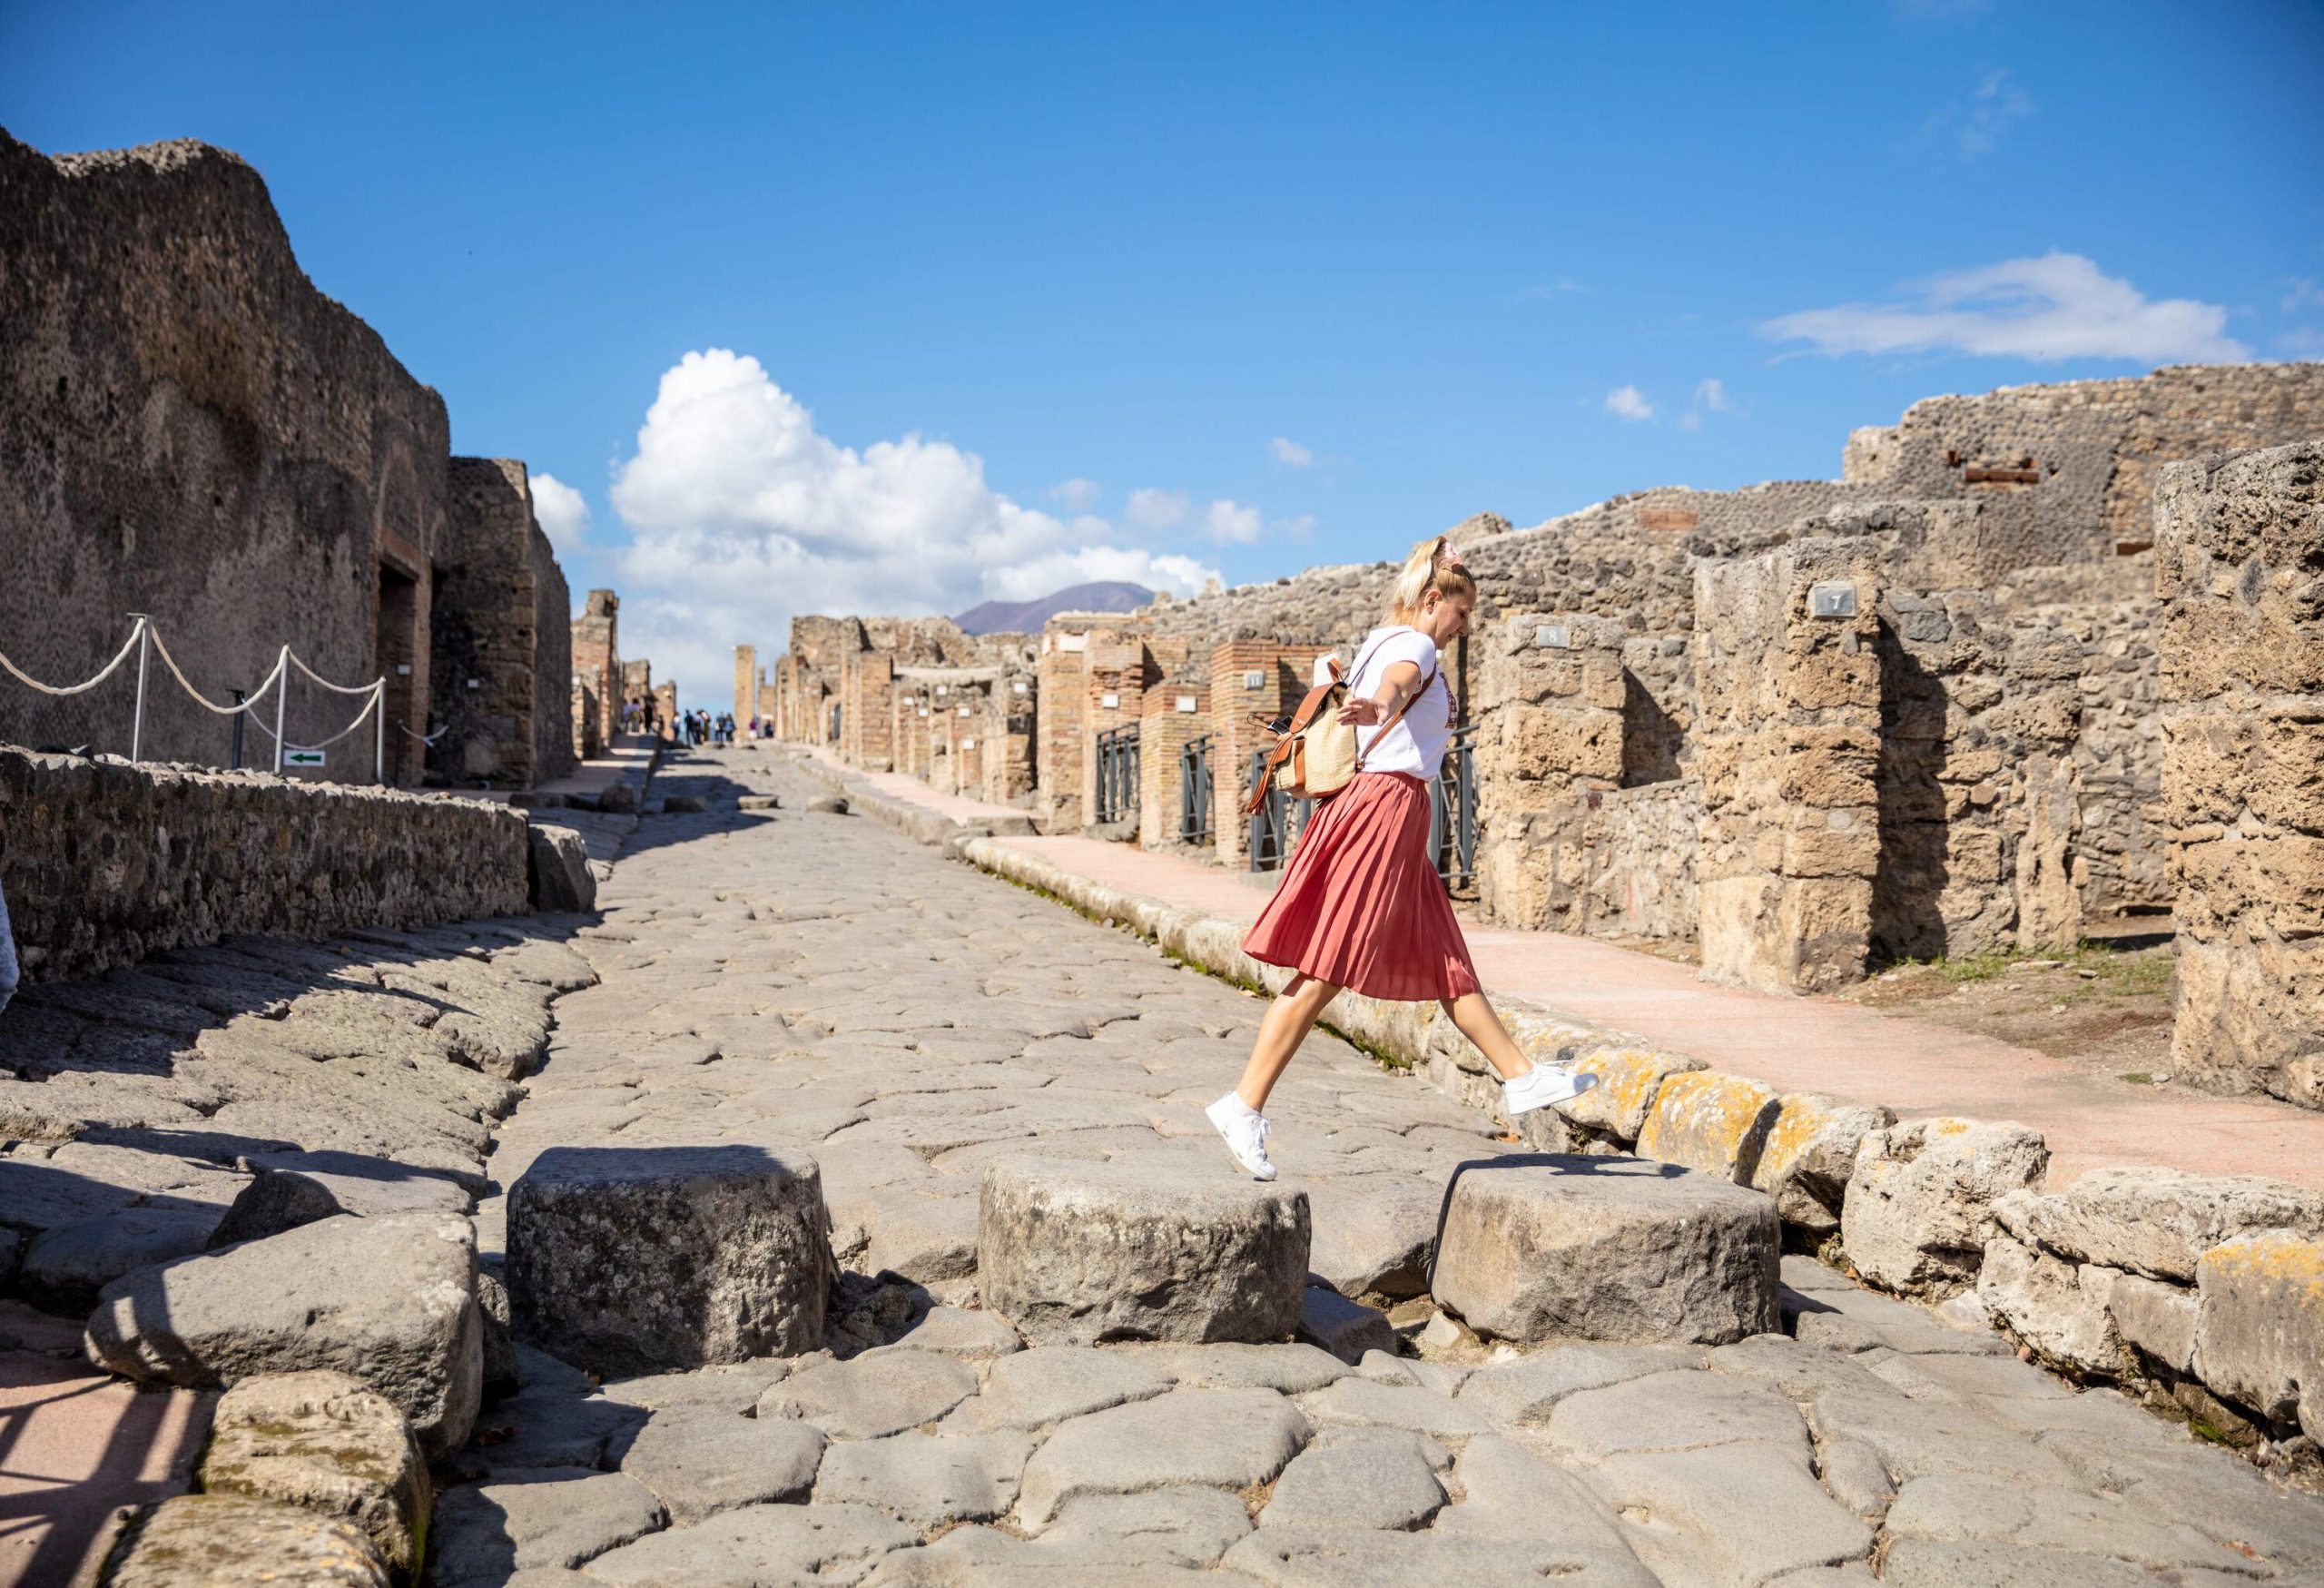 A young blonde lady hops on the rocks in a cobbled street in the middle of the ruins of a vast archaeological site.